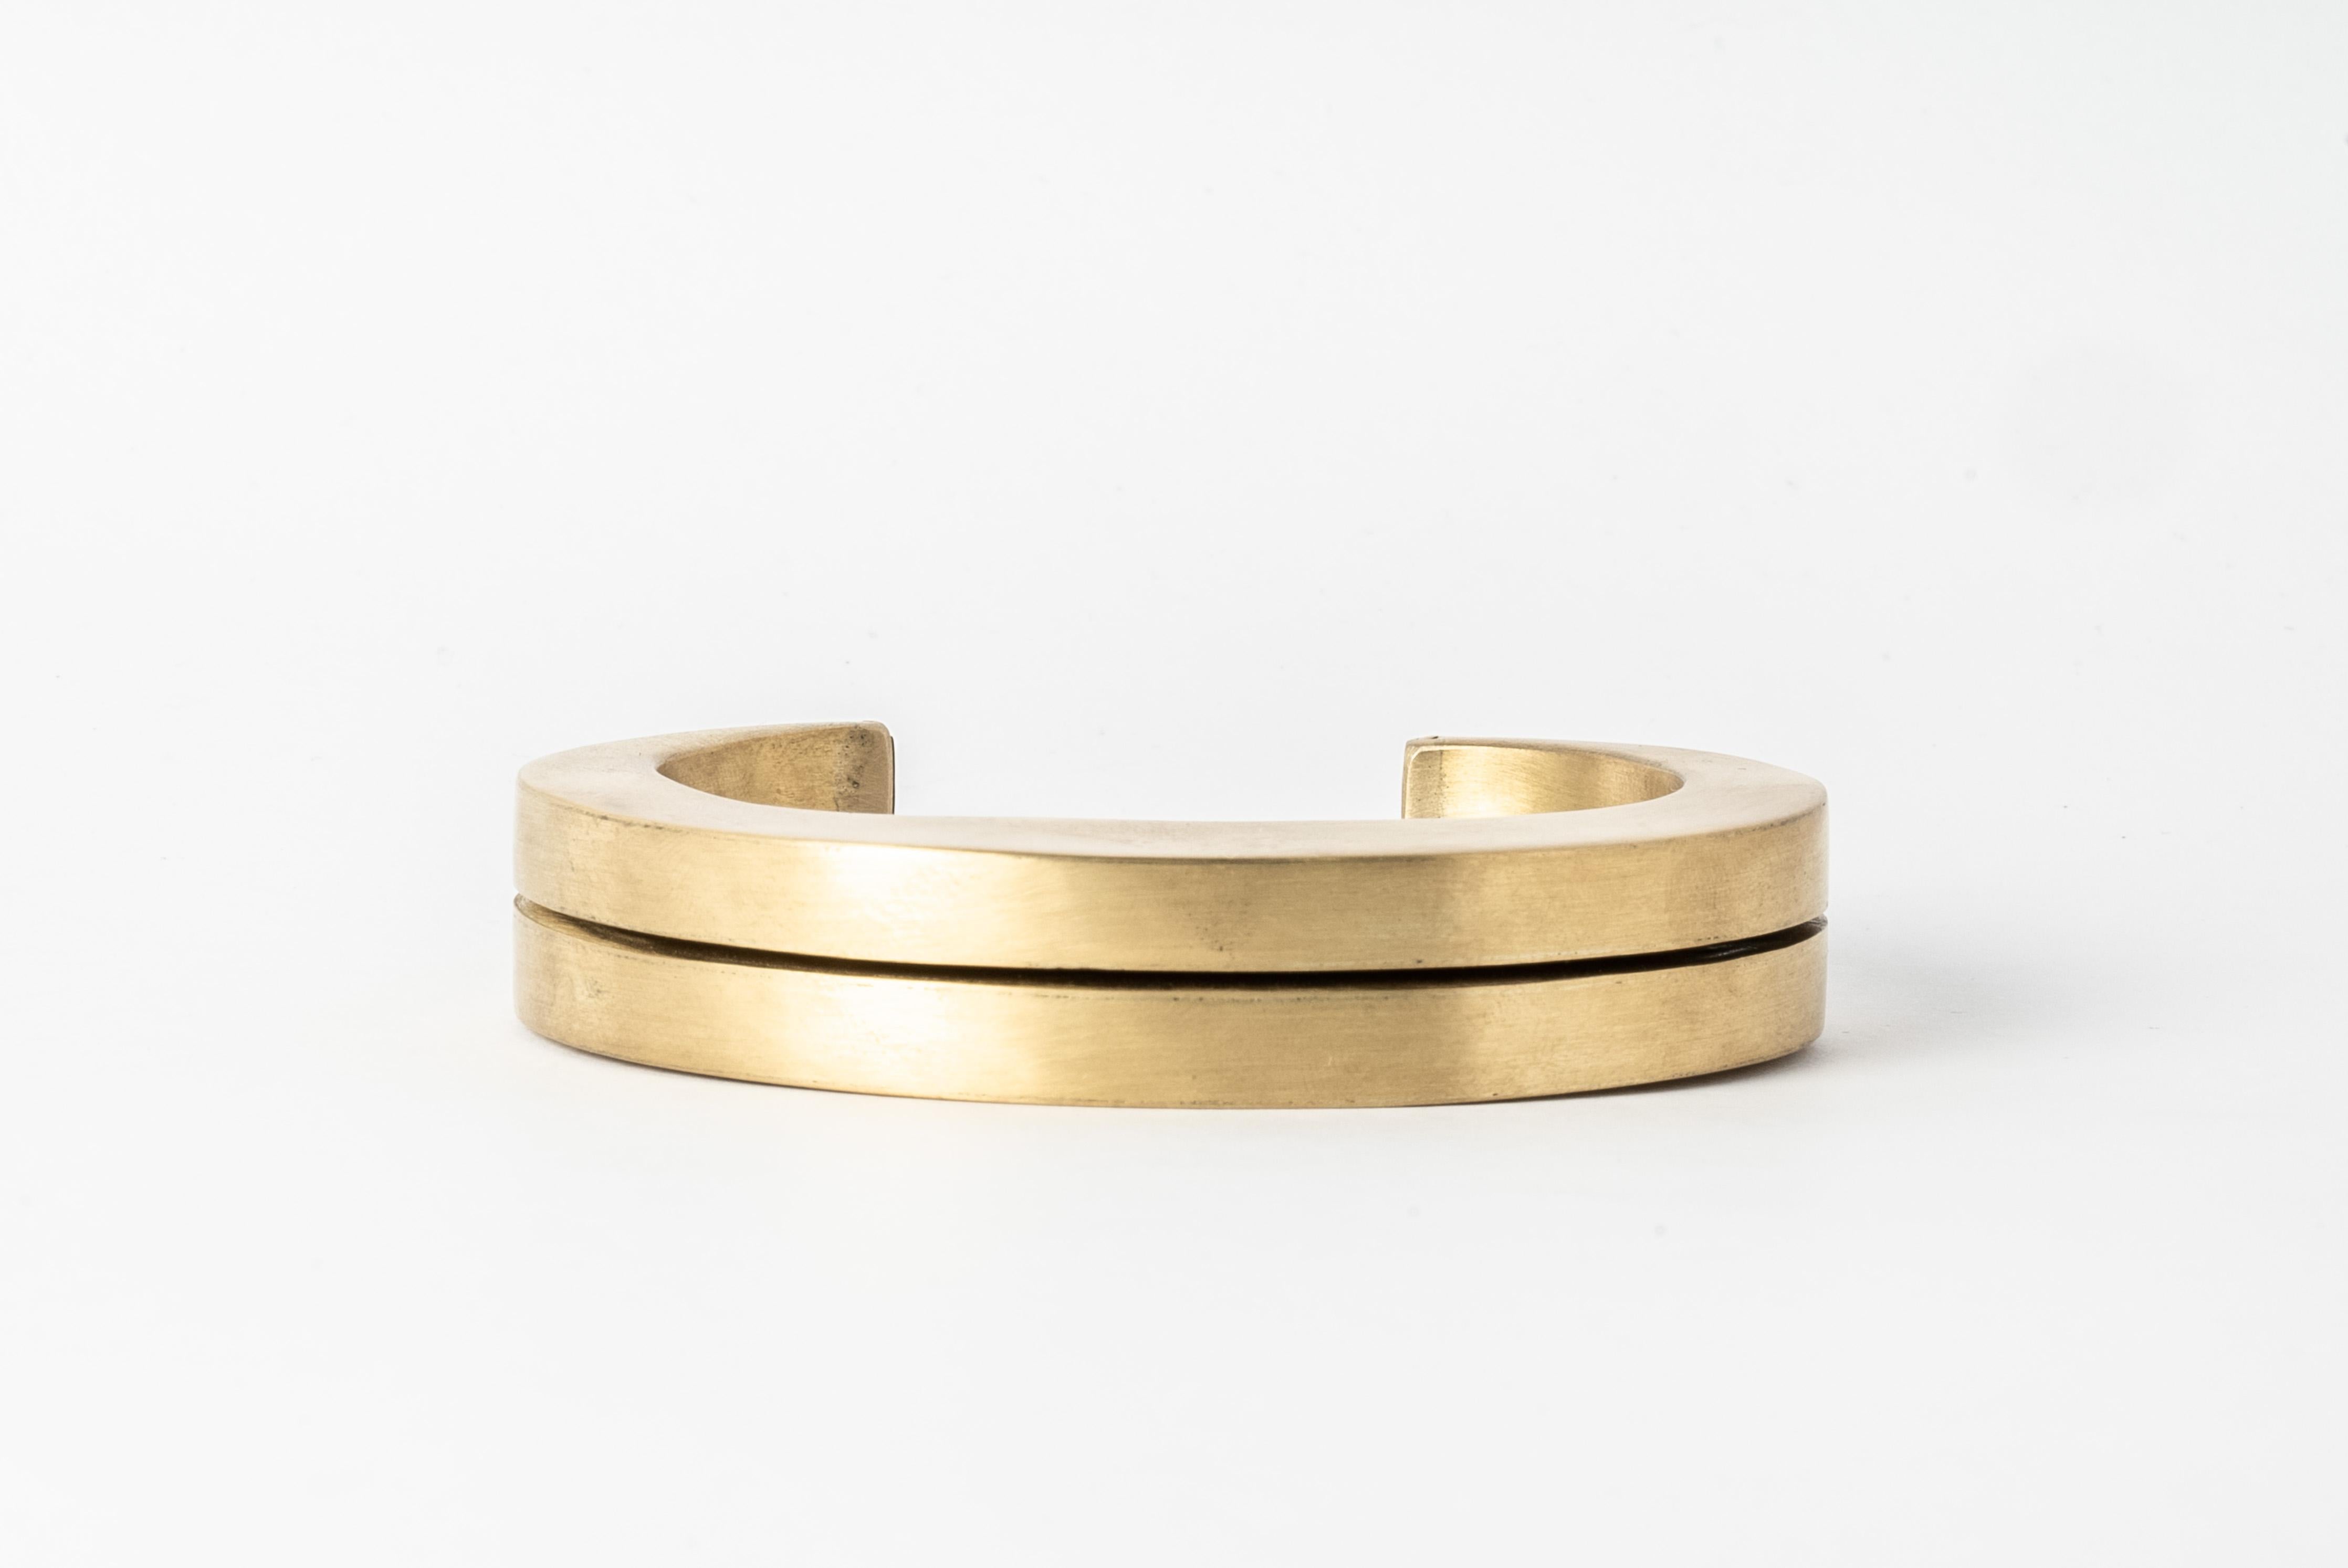 Bracelet in matte brass. This piece is 100% hand fabricated from metal plate; cut into sections and soldered together to make the hollow three dimensional form.